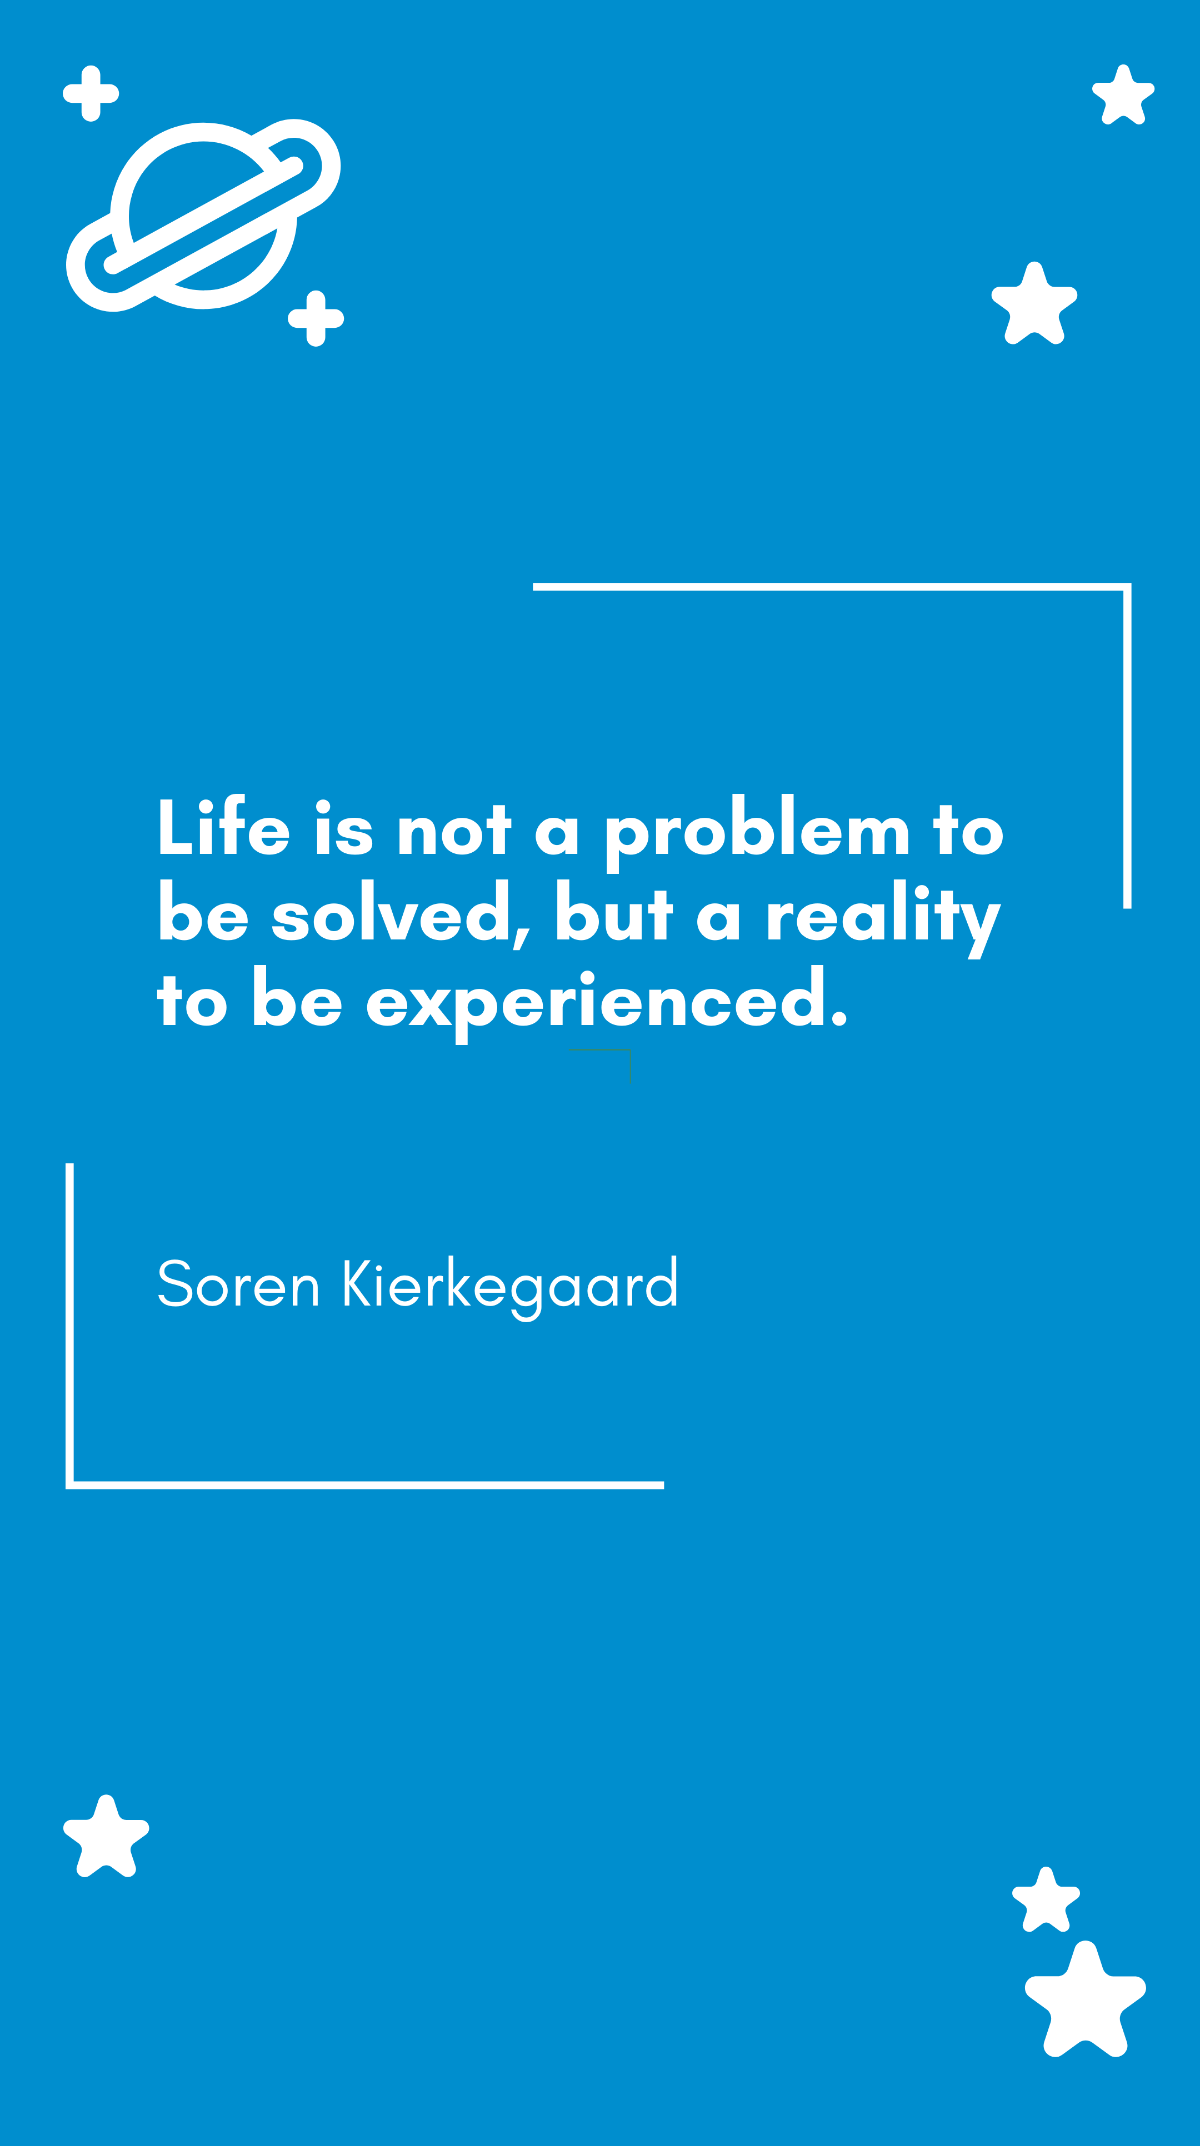 Soren Kierkegaard - Life is not a problem to be solved, but a reality to be experienced Template